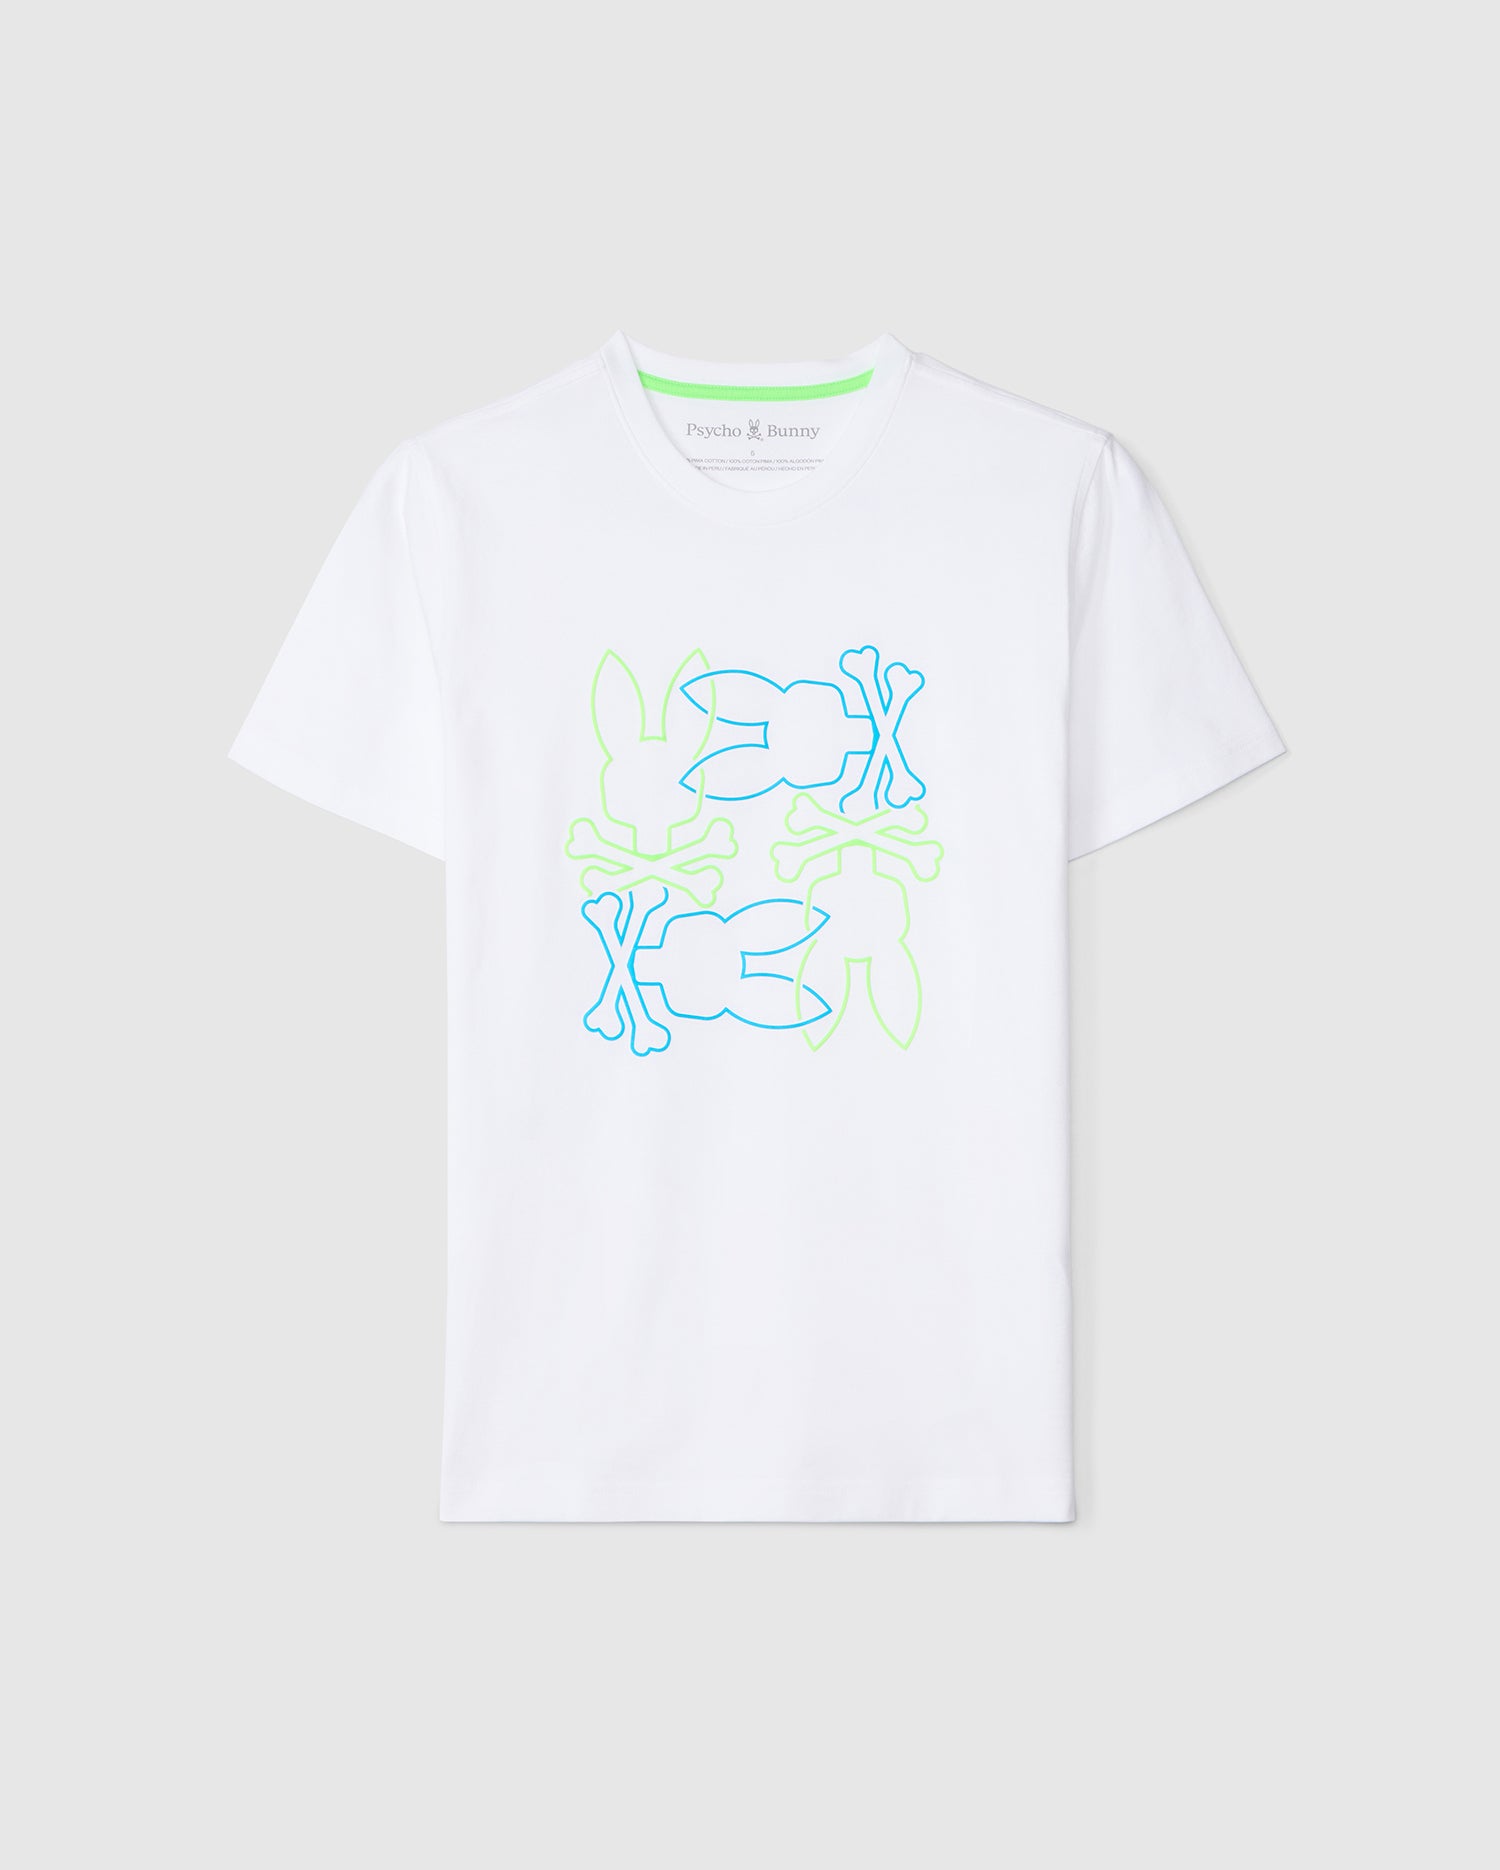 White MENS RODMAN GRAPHIC TEE - B6U111B2TS by Psycho Bunny featuring a graffiti-inspired, HD-printed design in blue and green lettering that reads 